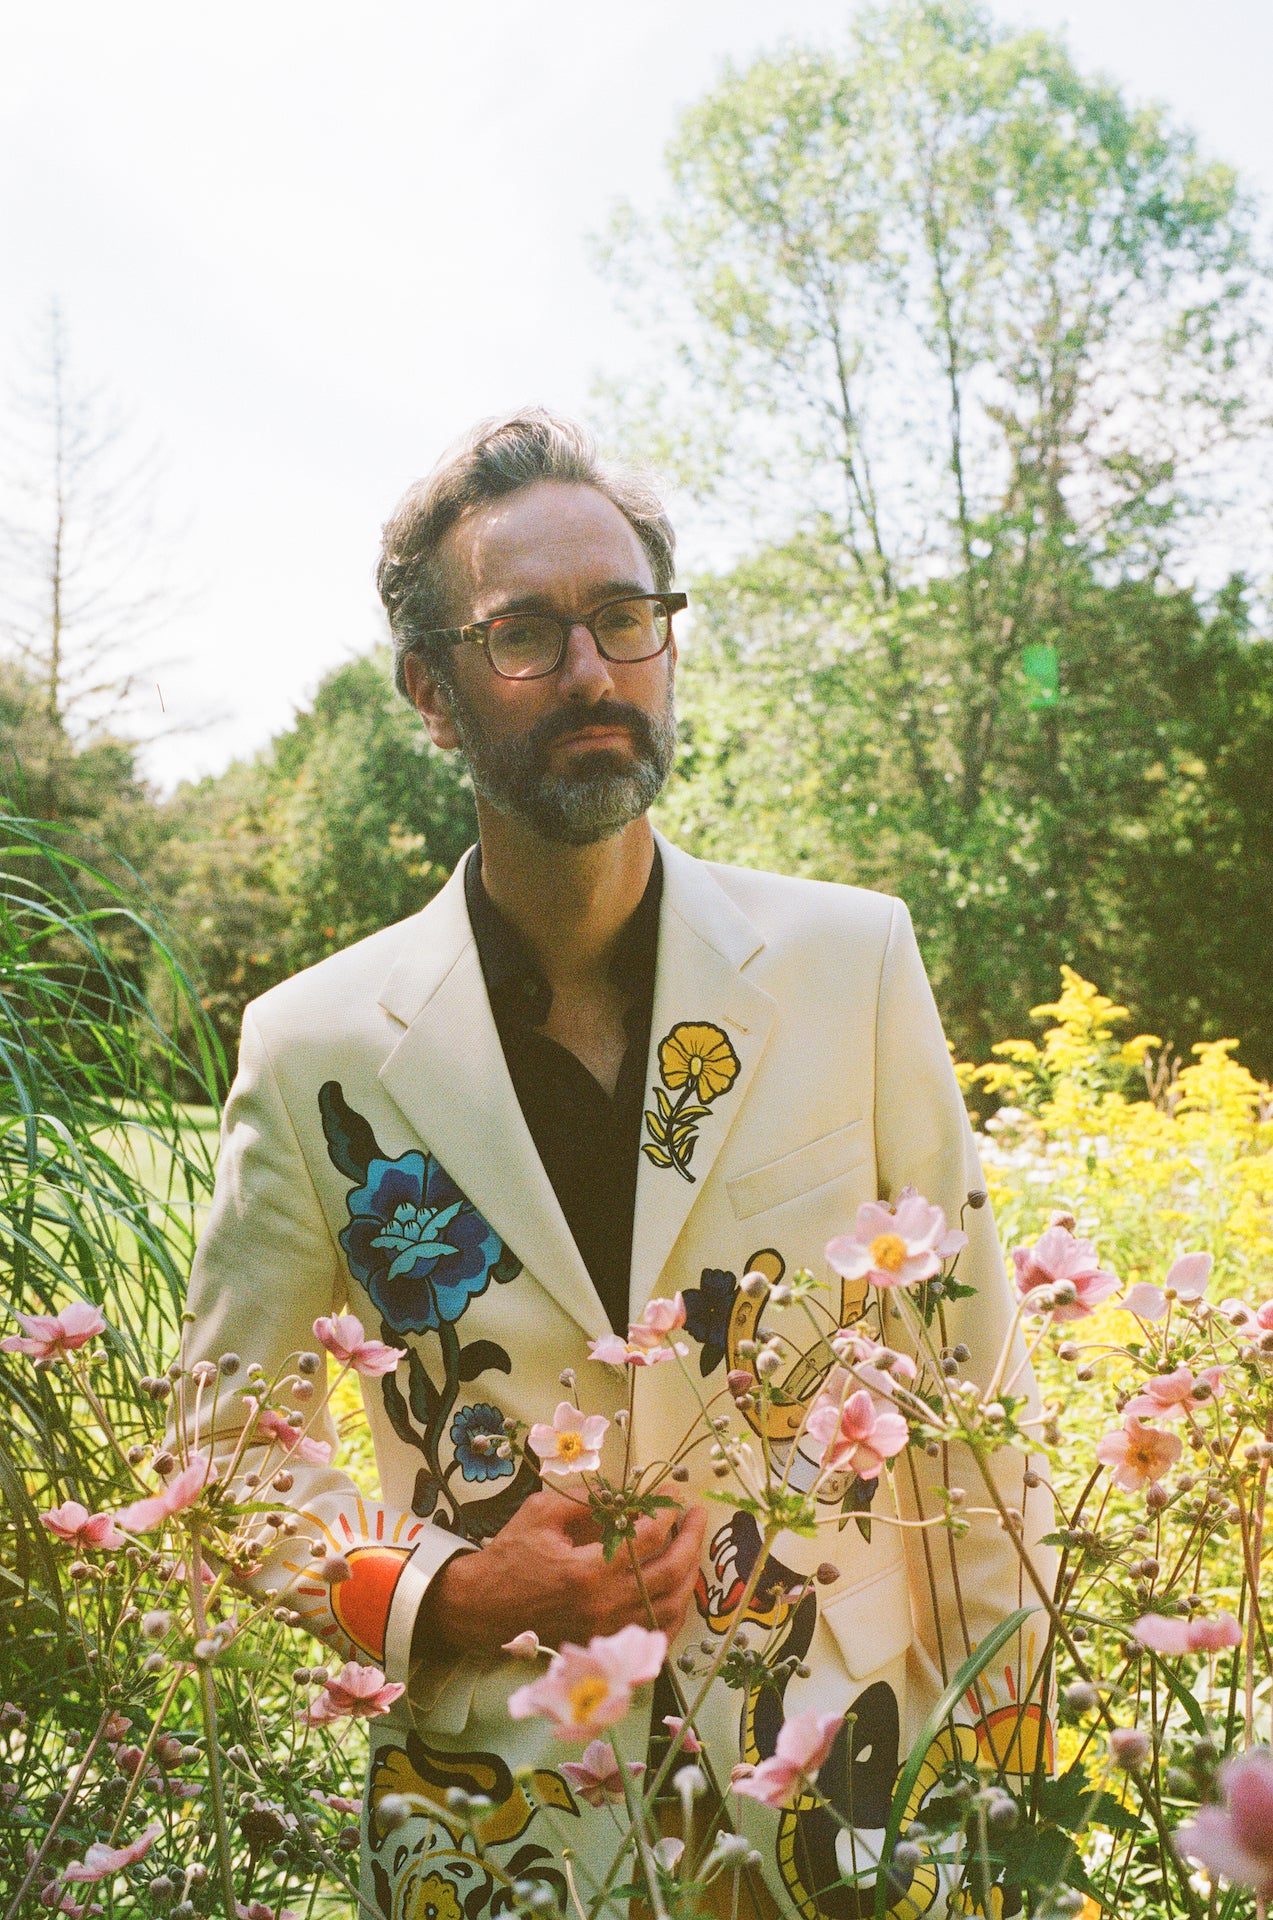 David Myles standing in Nova Scotia Canada in a field of flowers wearing a white jacket with a floral design on it.